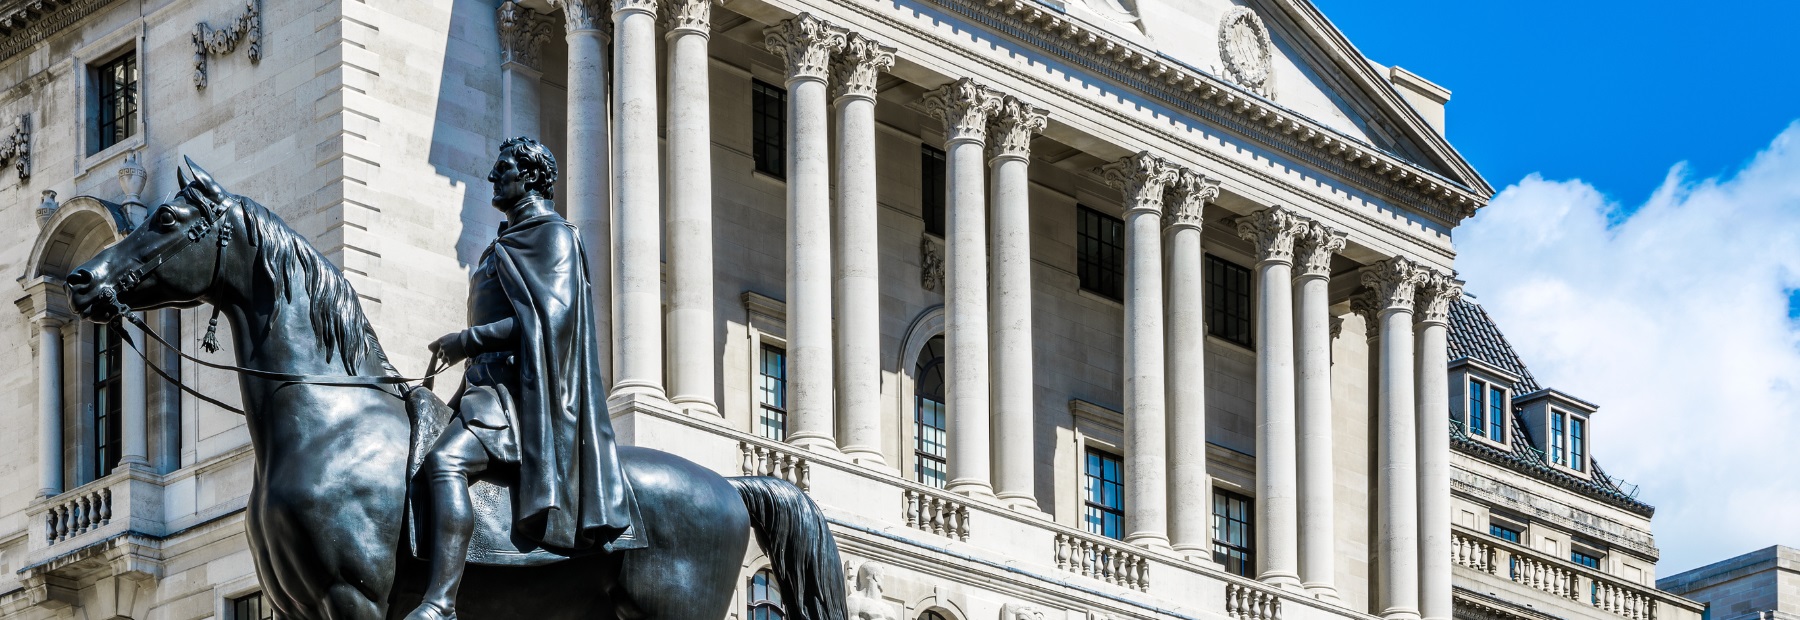 Bank of England with blue sky behind